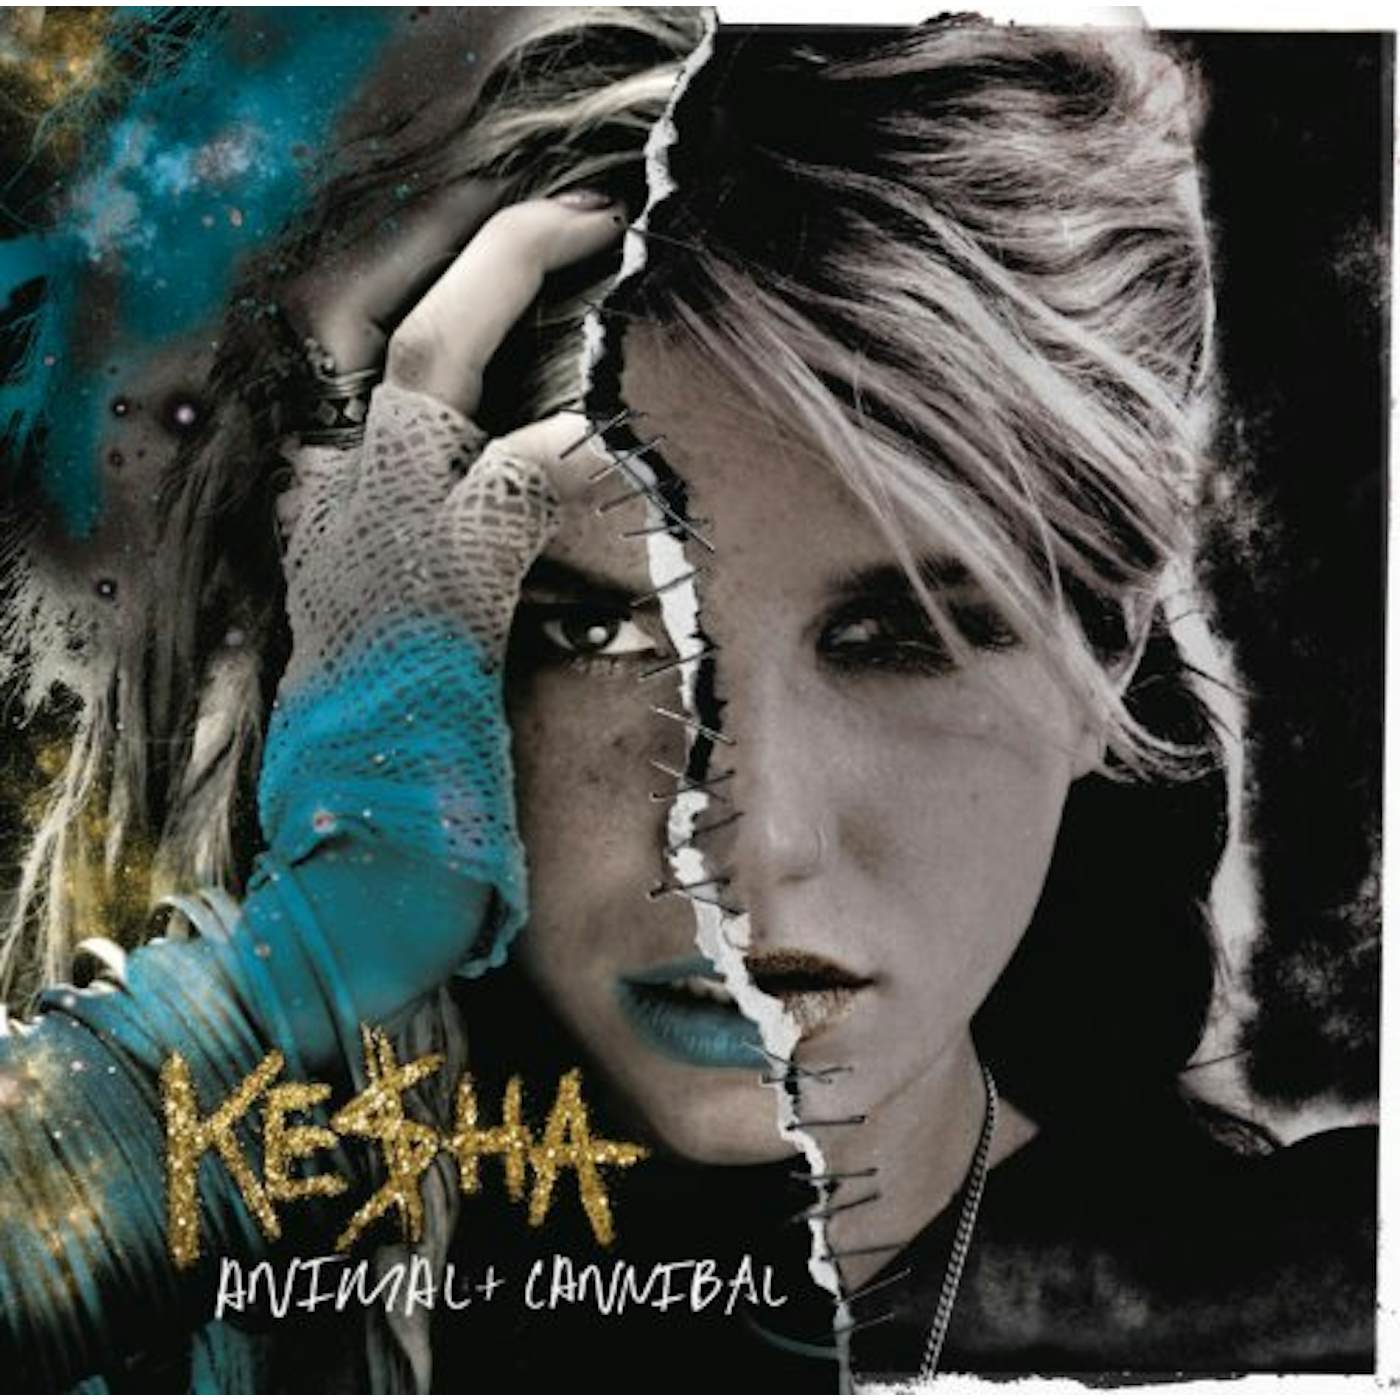 Kesha ANIMAL + CANNIBAL (DELUXE EDITION) (GOLD SERIES) CD